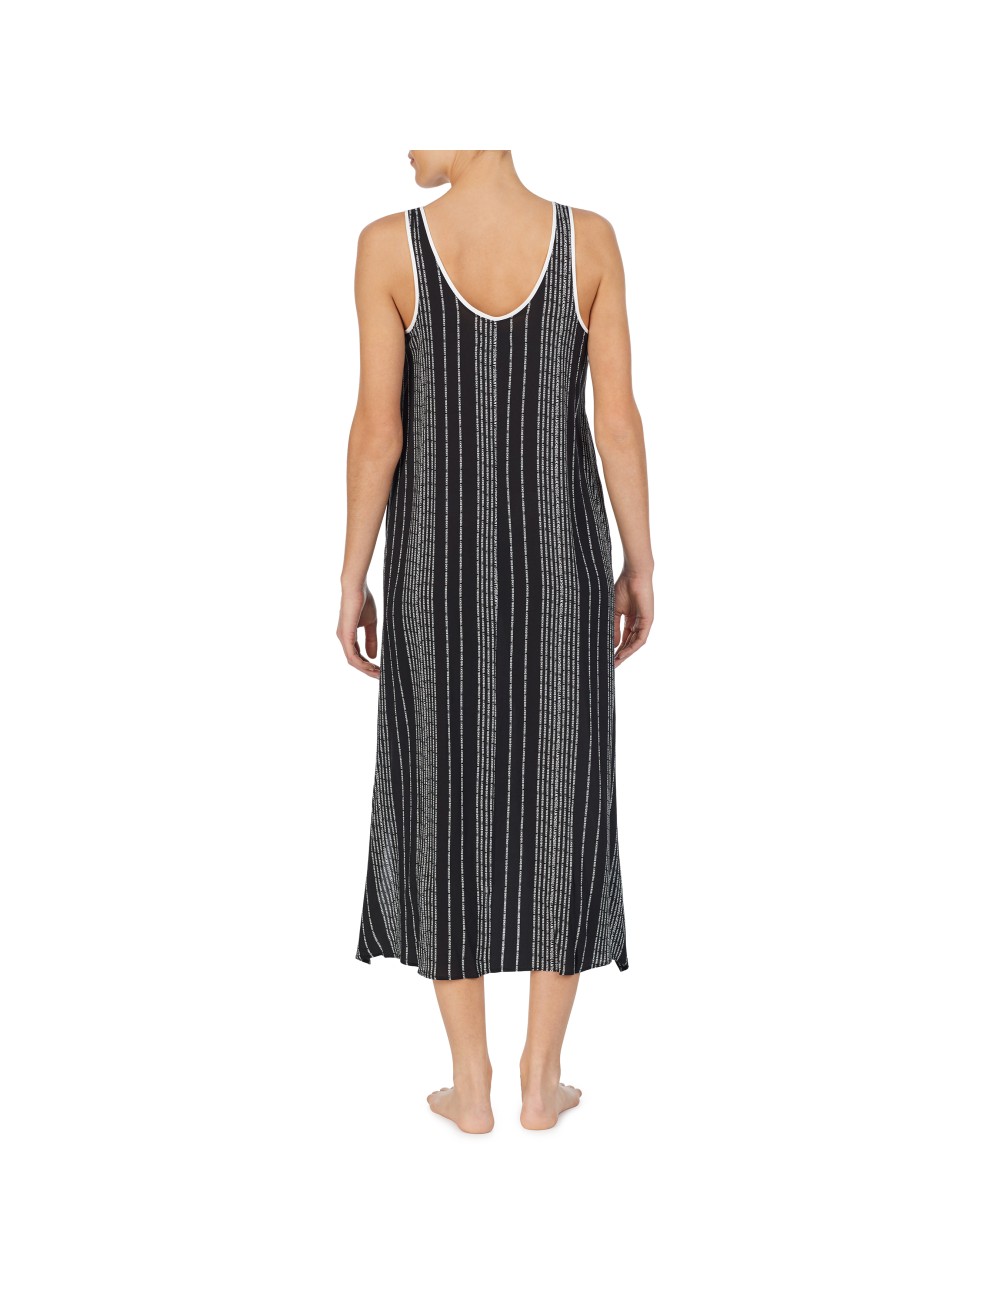 WOMEN'S DKNY NIGHTGOWN WITH LINEAR PRINT